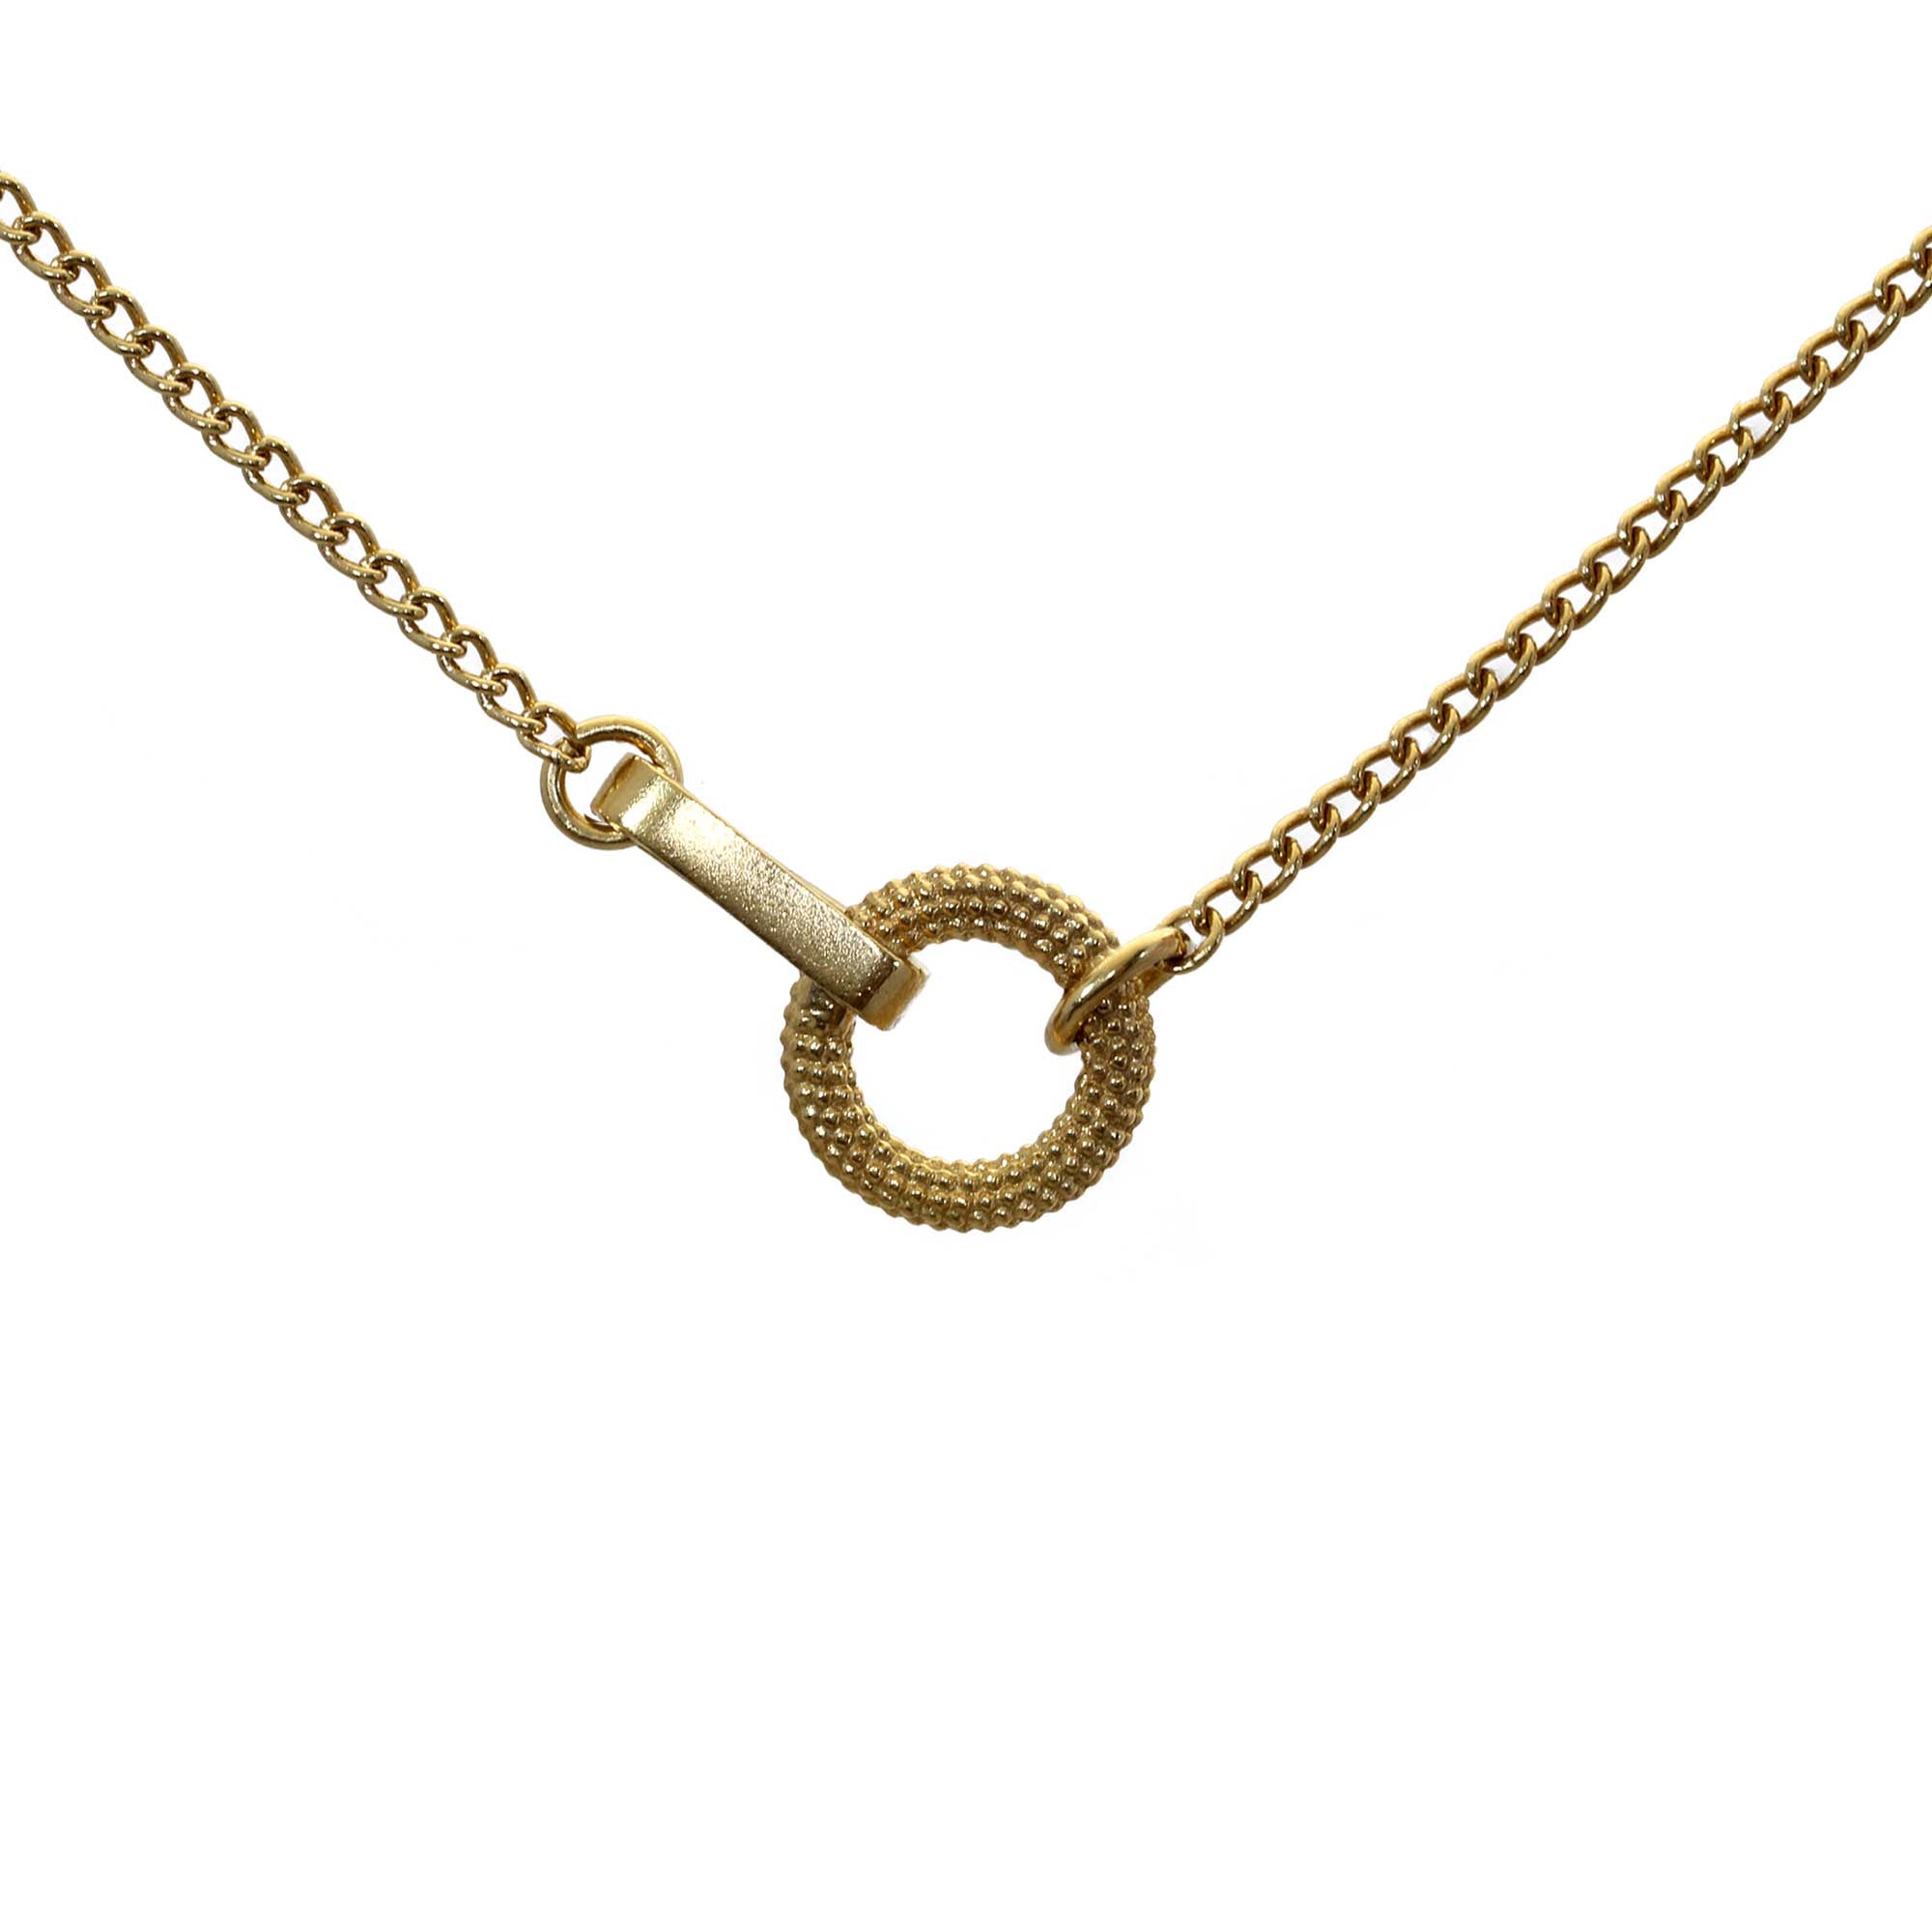 Tyro Short Chain Necklace in yellow gold